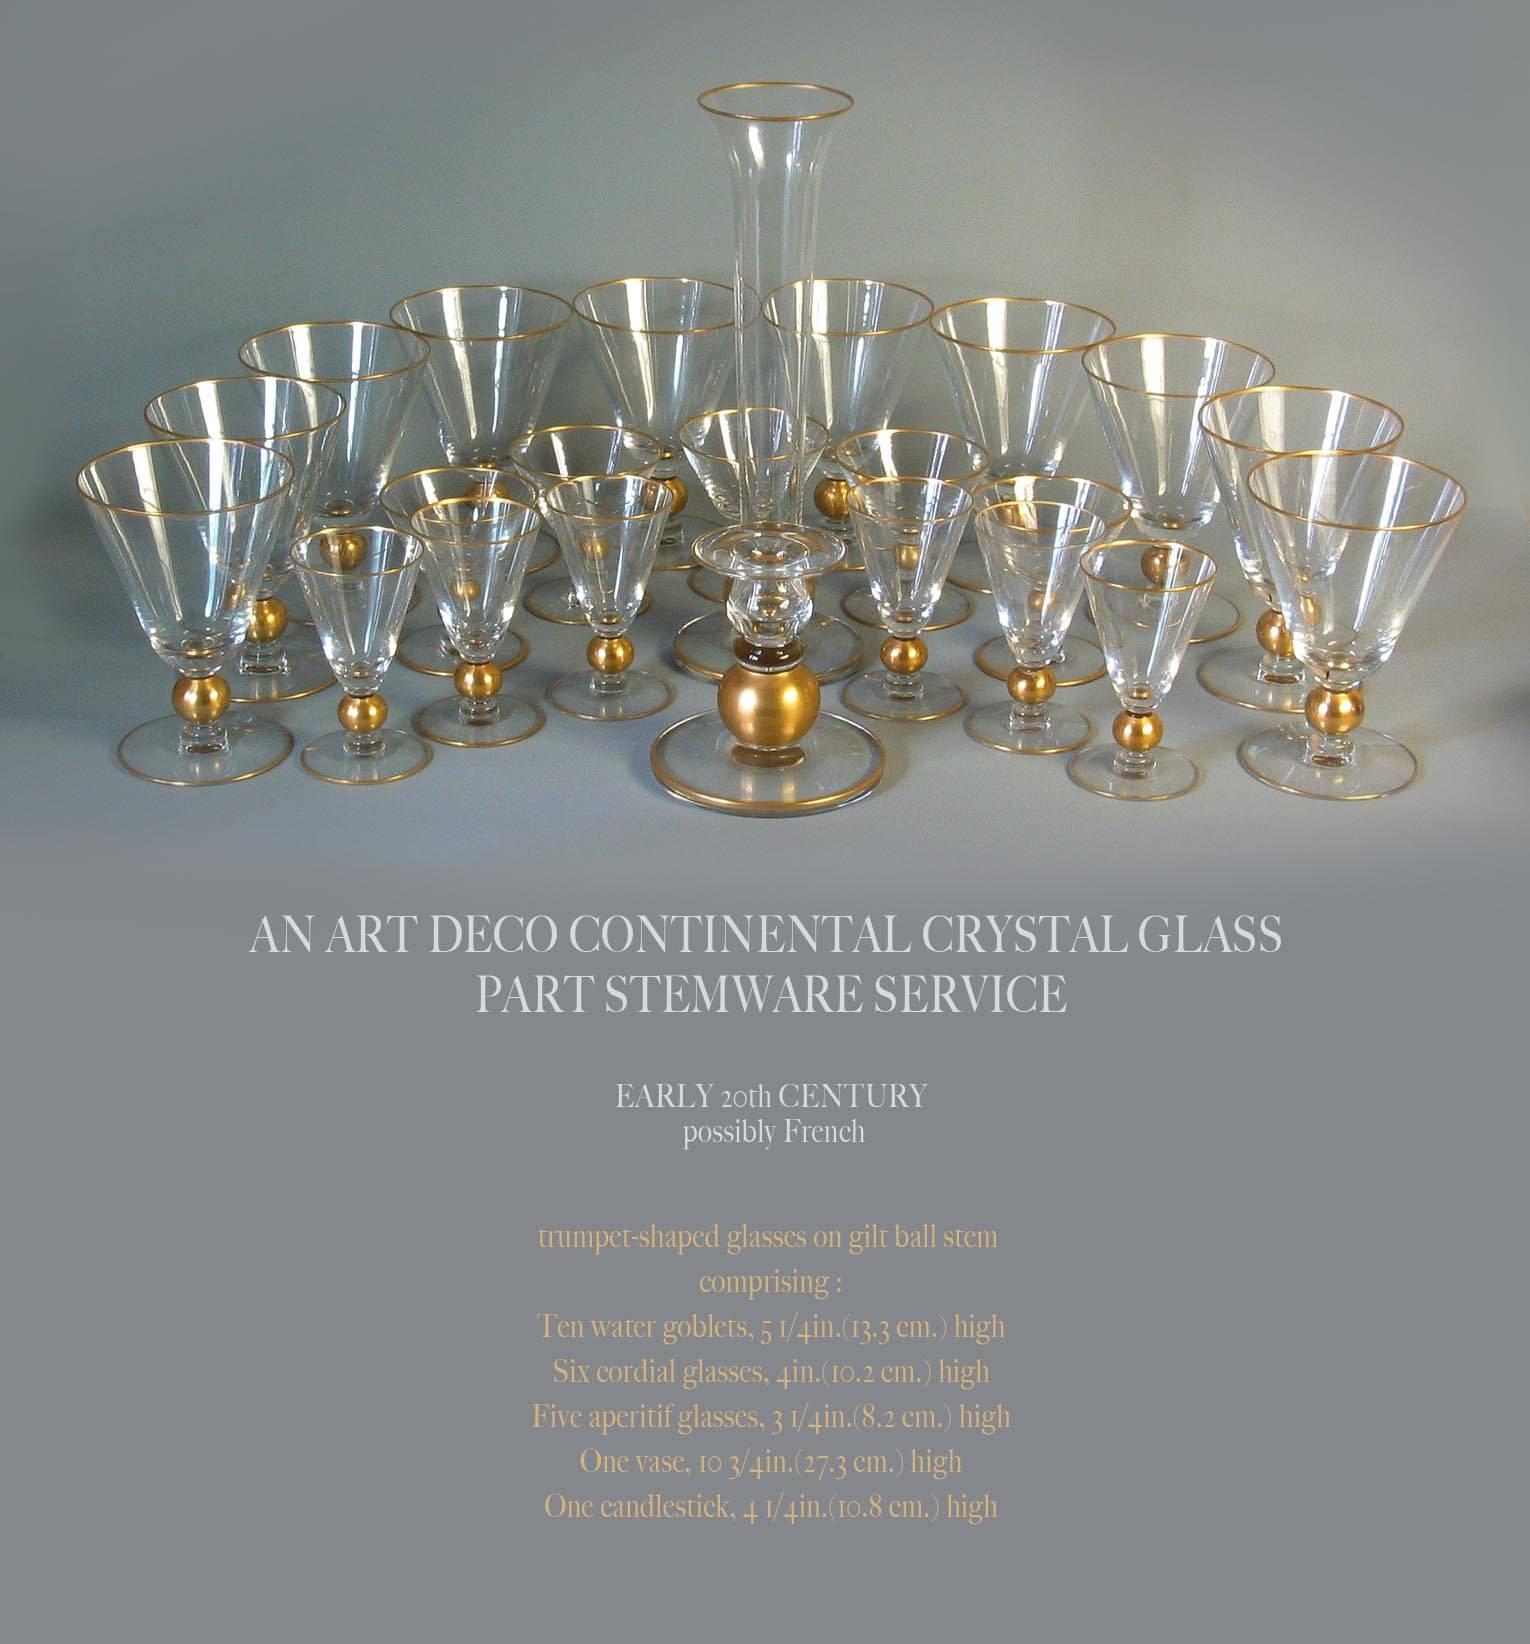 An Art Deco continental crystal glass part stemware service, early 20th century, Possibly French.
The partial service consists of 23 pieces in total as follows,
Trumpet shaped glasses on gilt ball stem comprising of:
Ten water goblets, 5